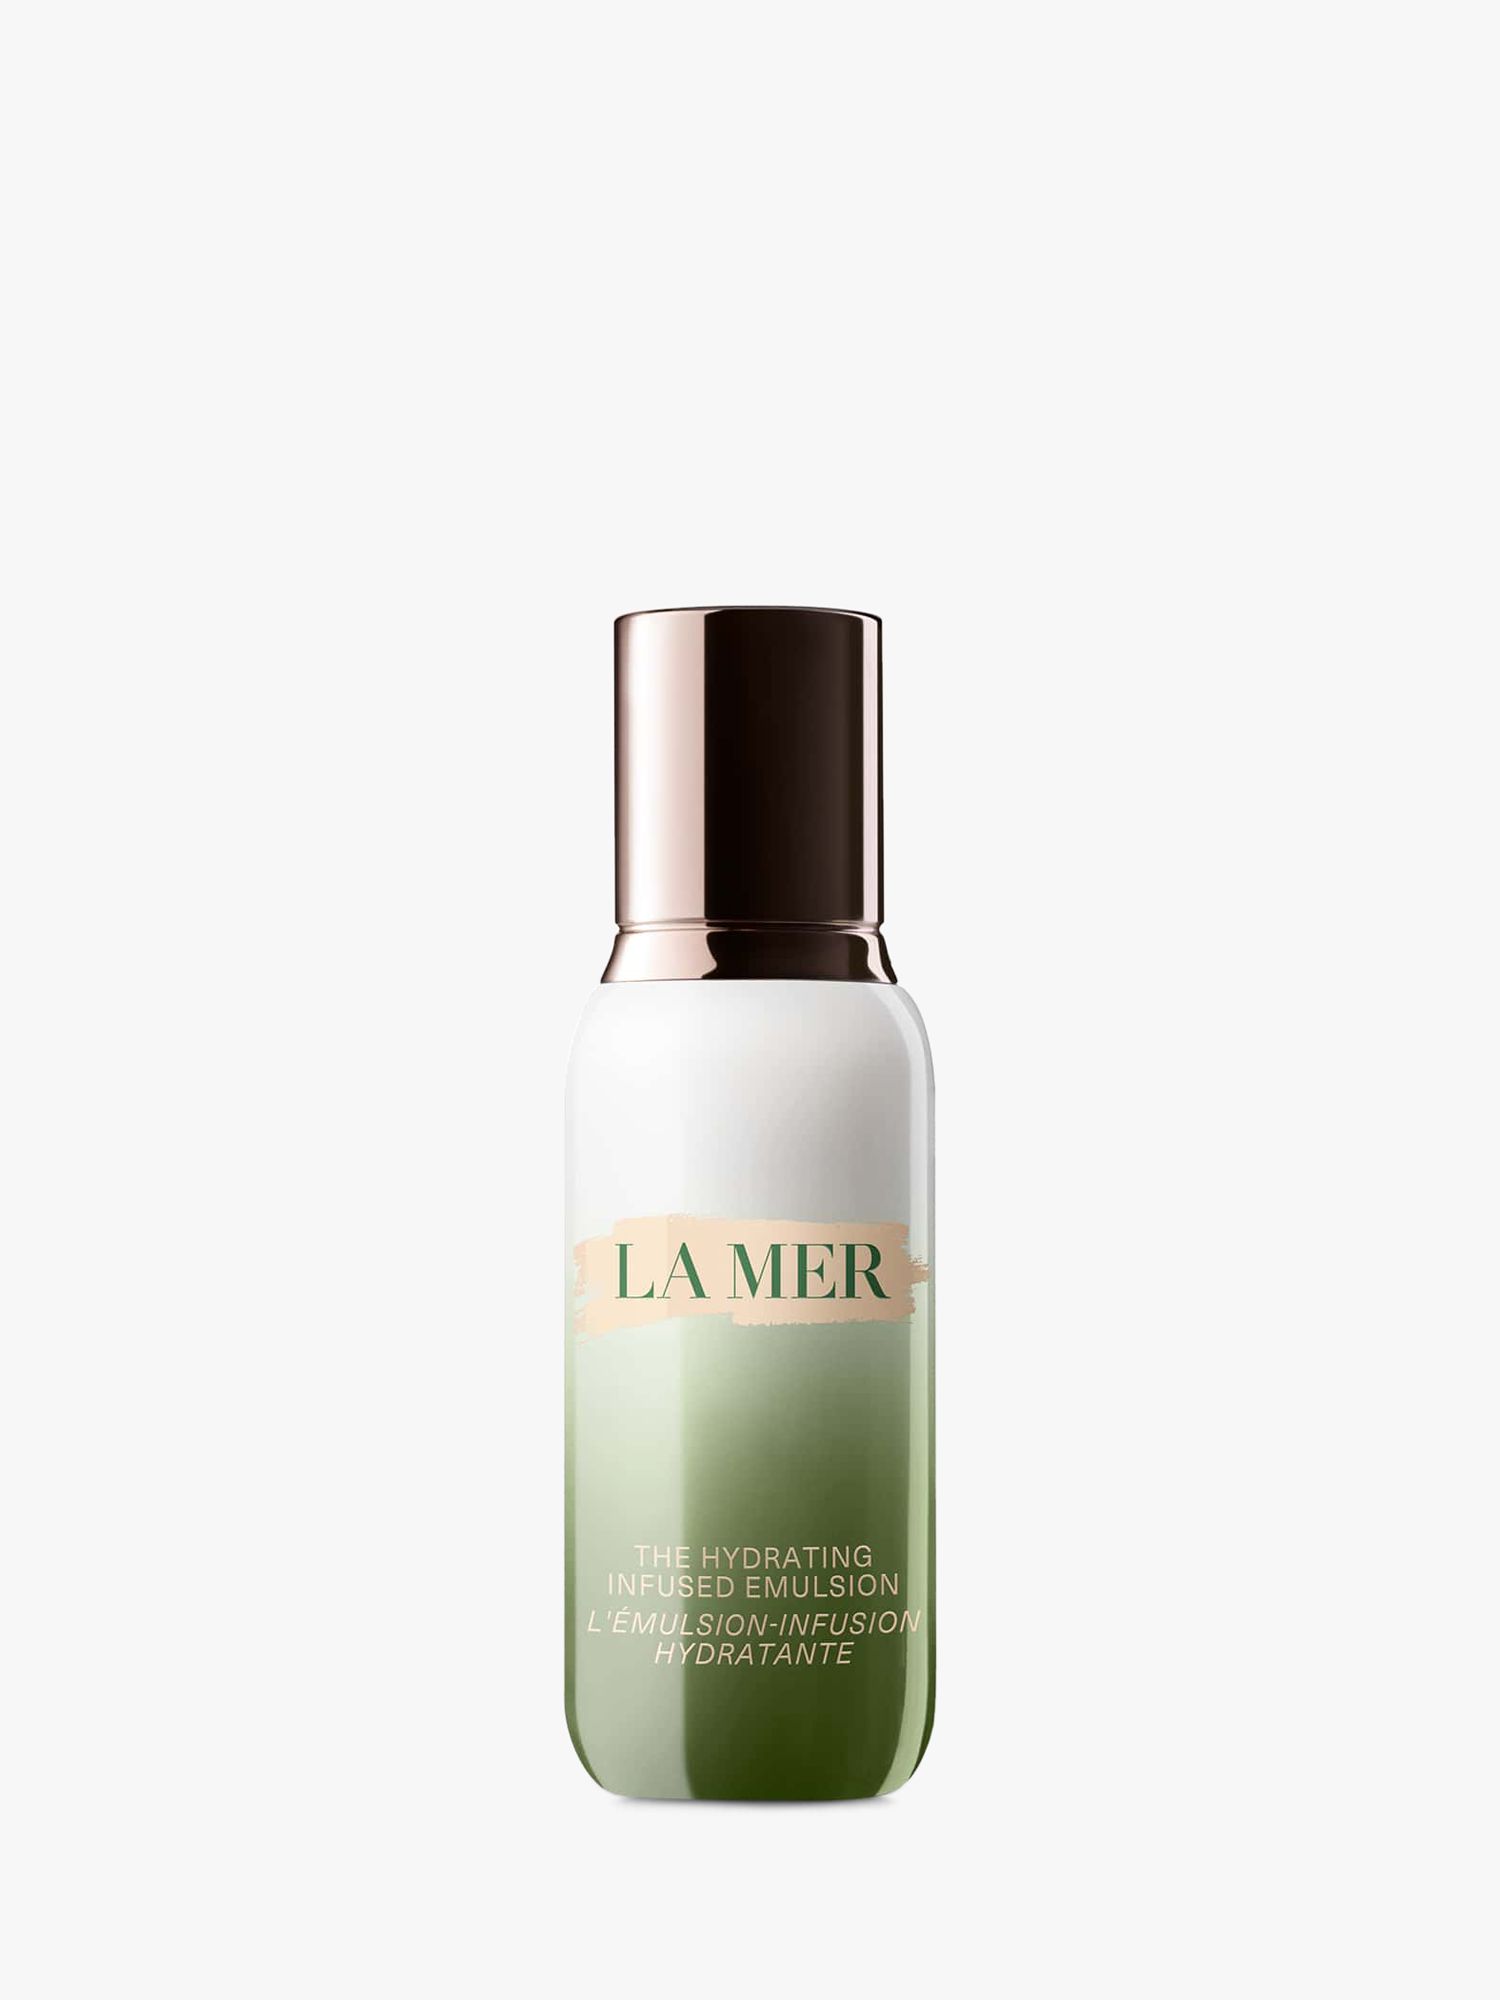 La Mer The Hydrating Infused Emulsion, 50ml